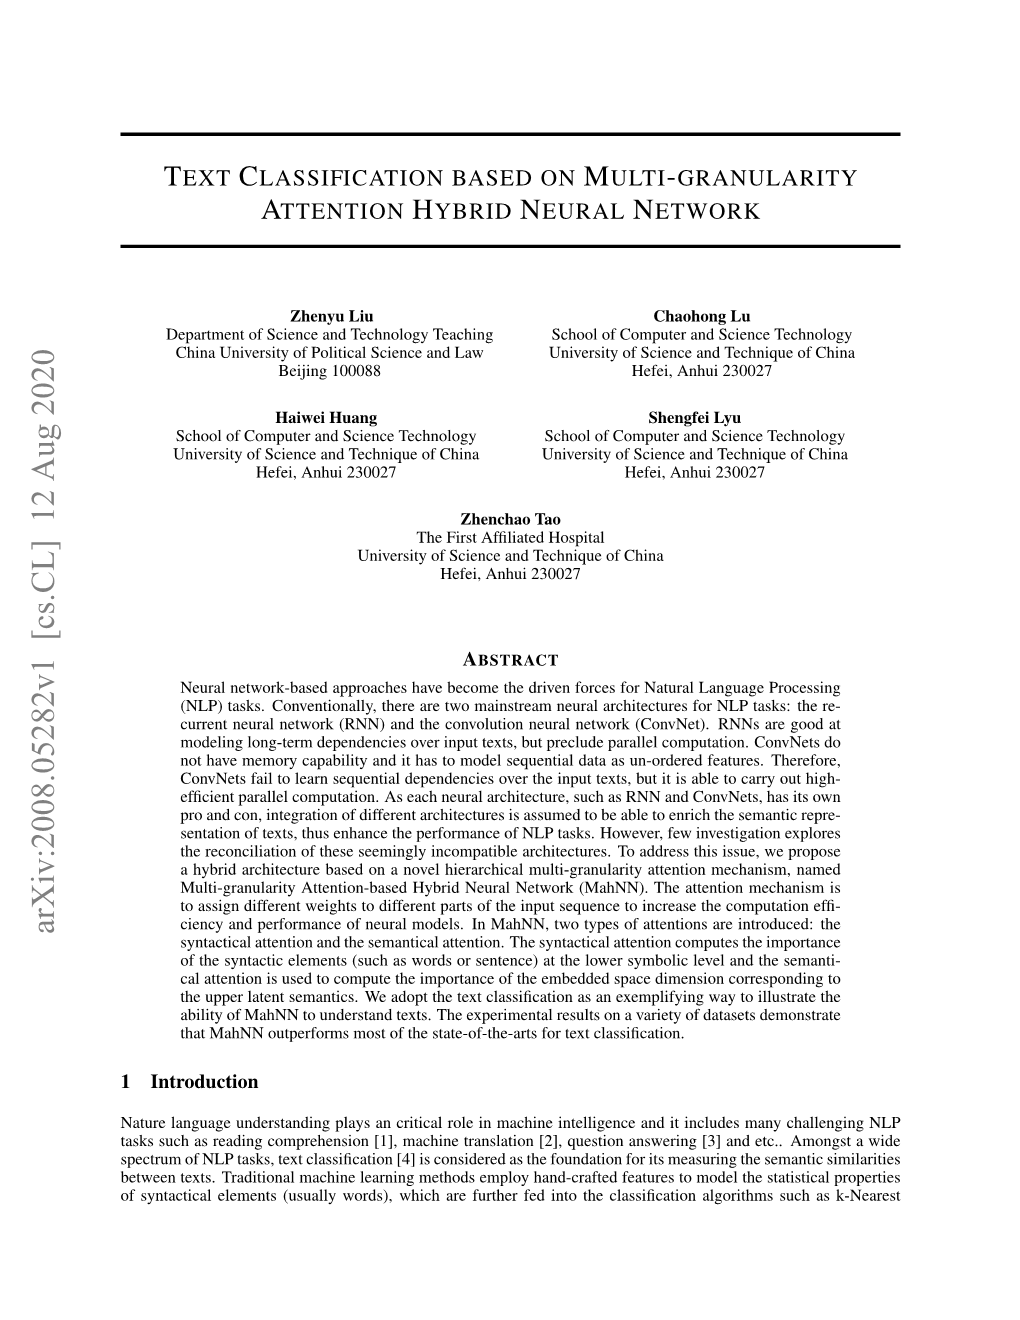 Text Classification Based on Multi-Granularity Attention Hybrid Neural Network